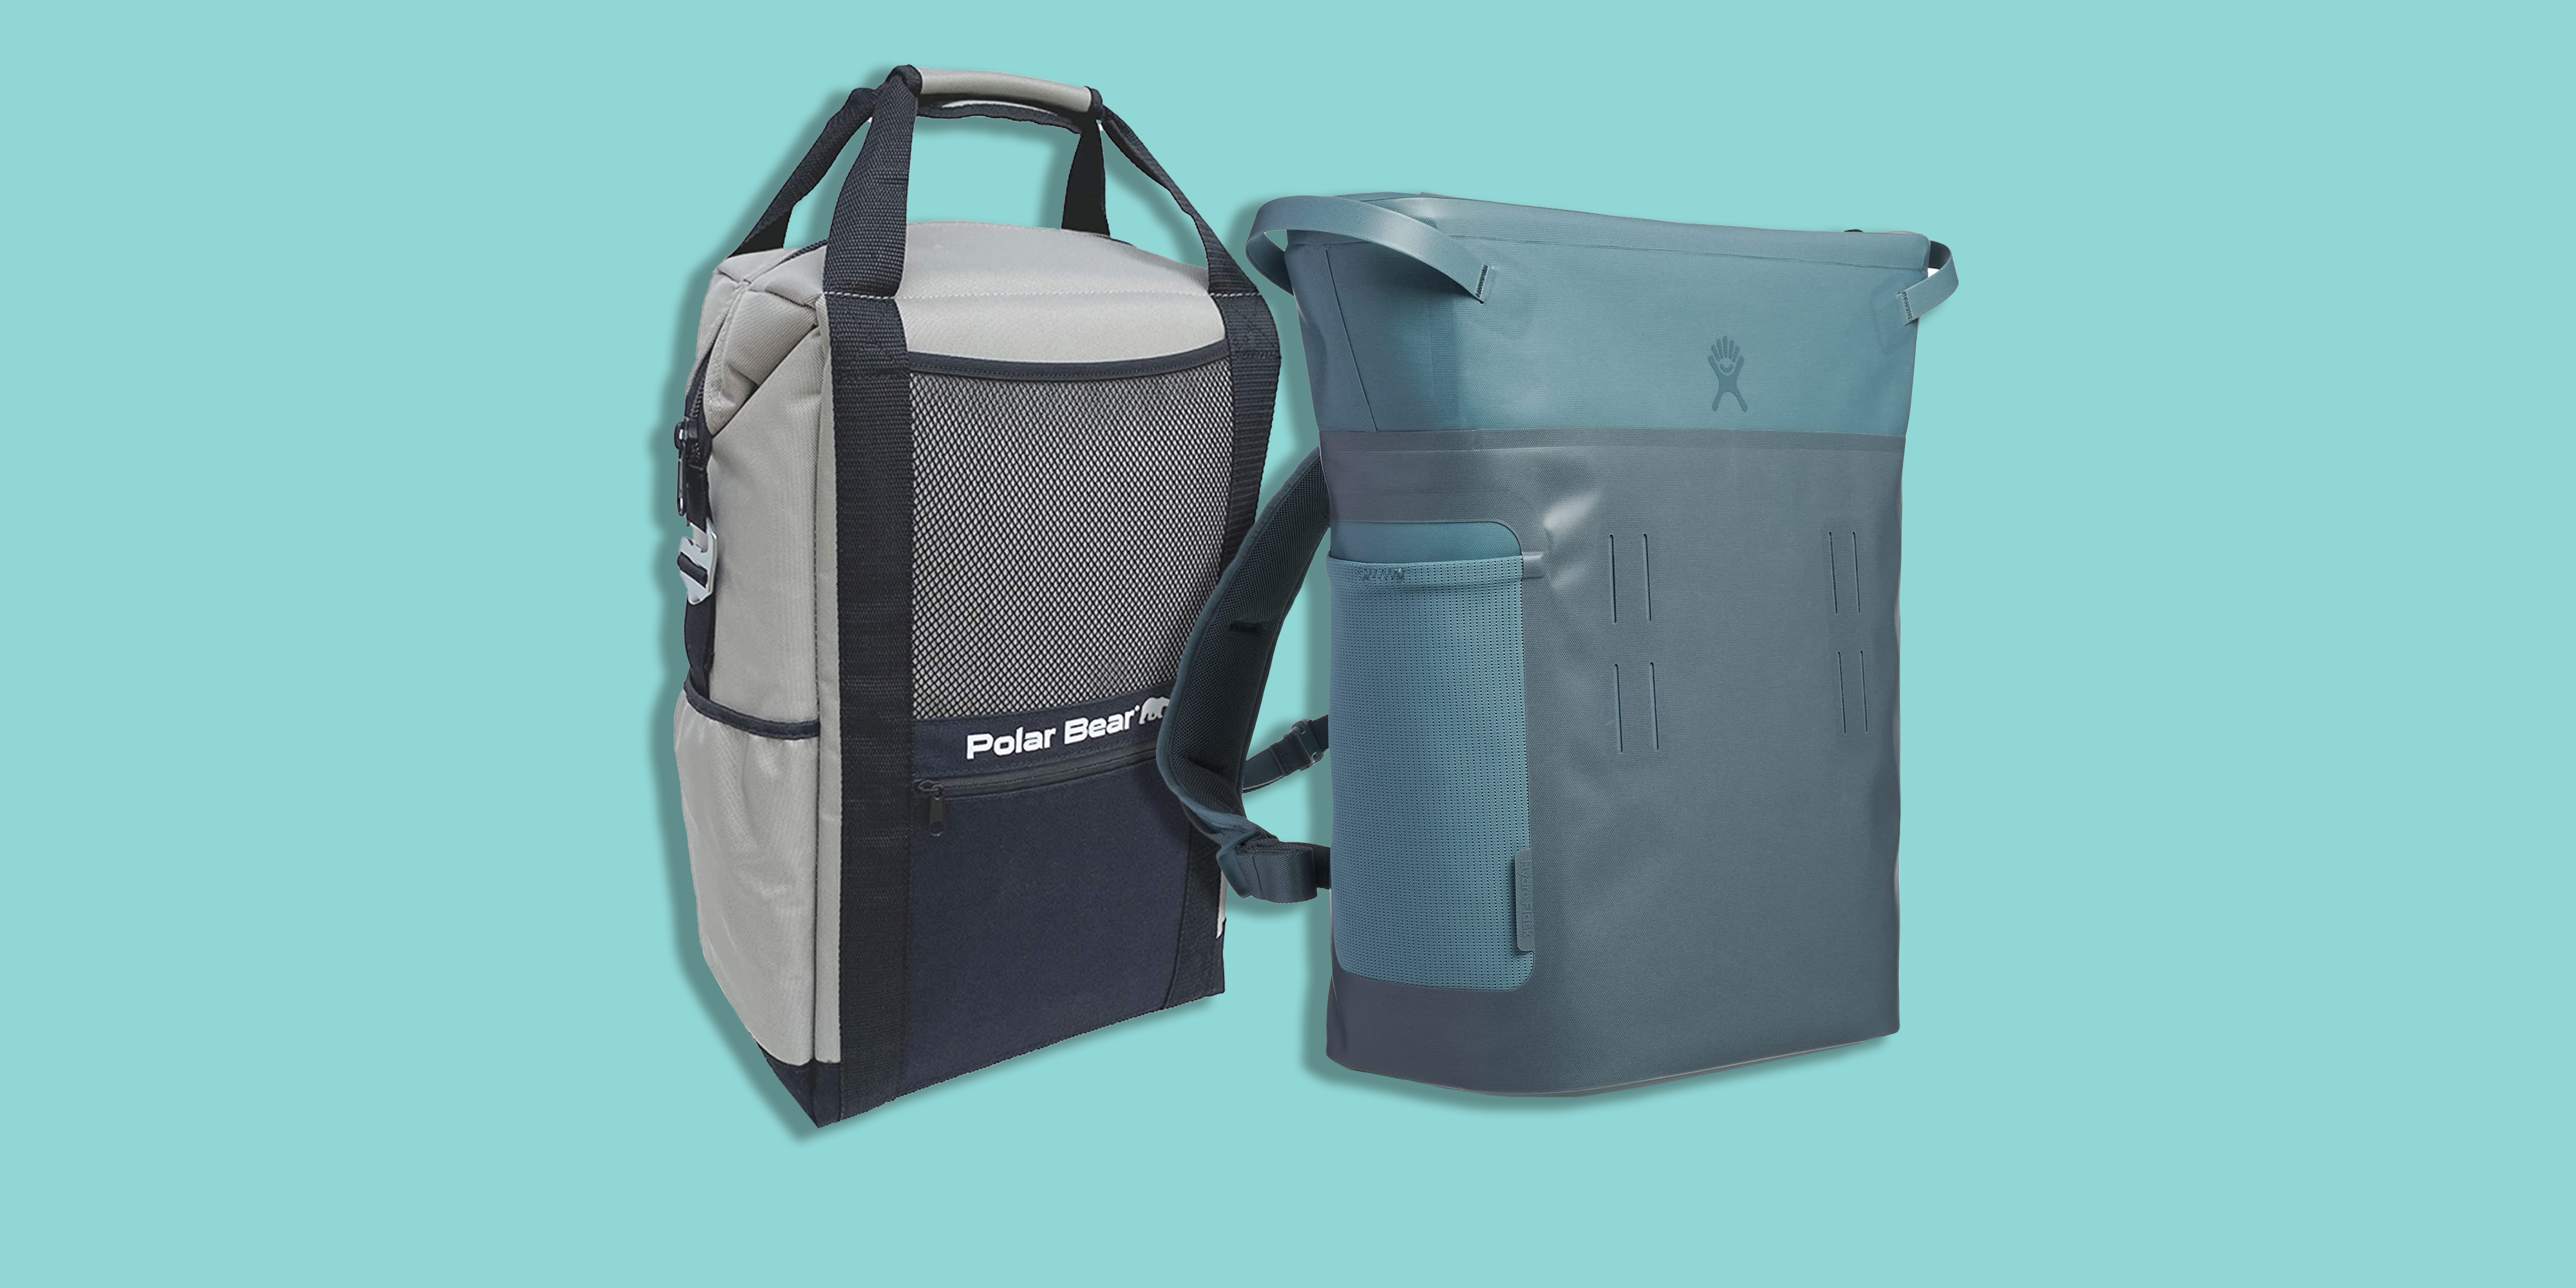 Best 6 Pack Coolers - The Cooler Zone